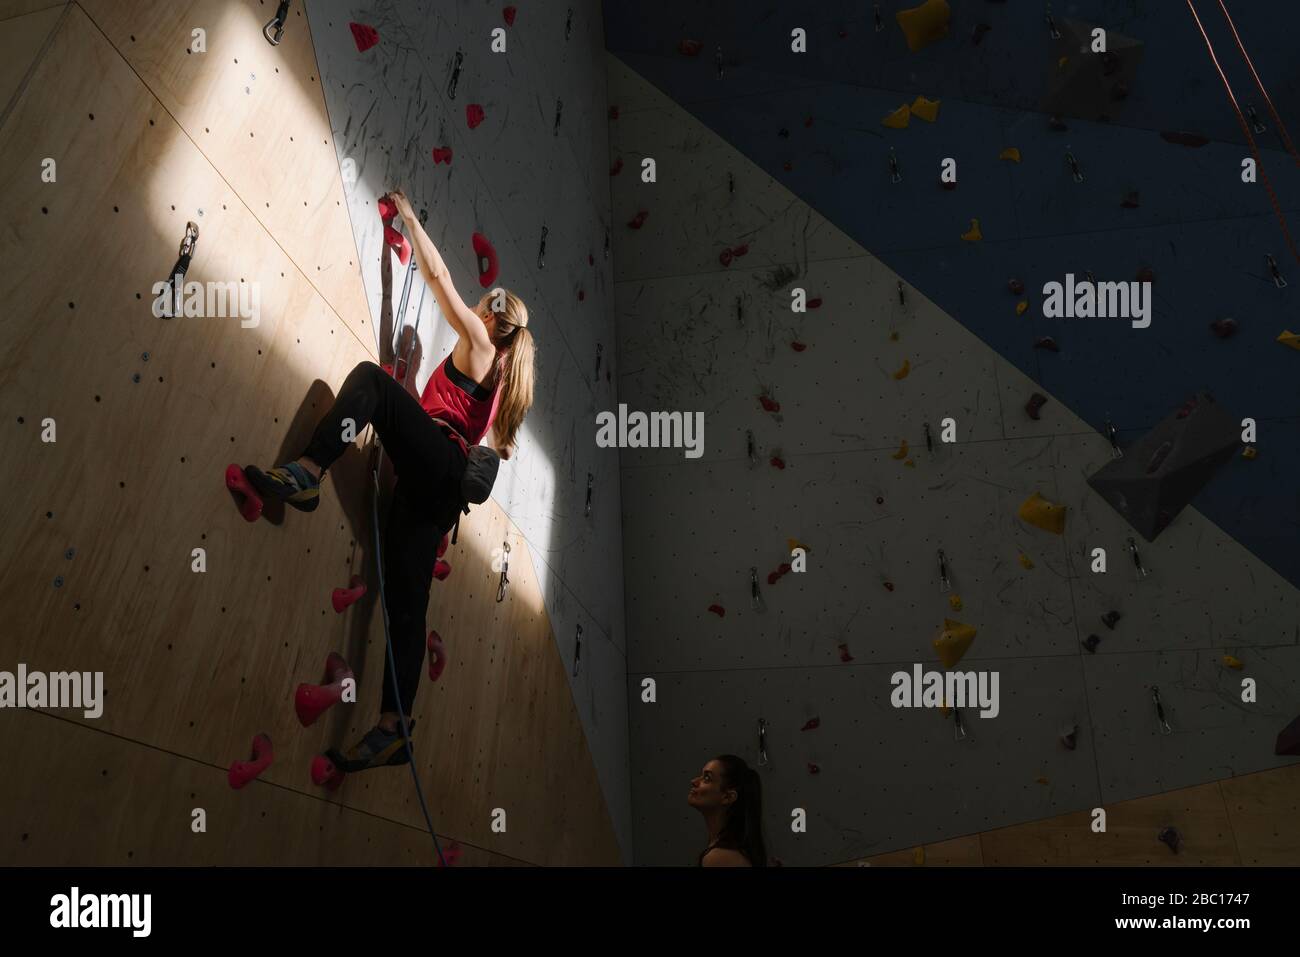 Woman climbing on the wall in climbing gym with sunlight and shadow Stock Photo